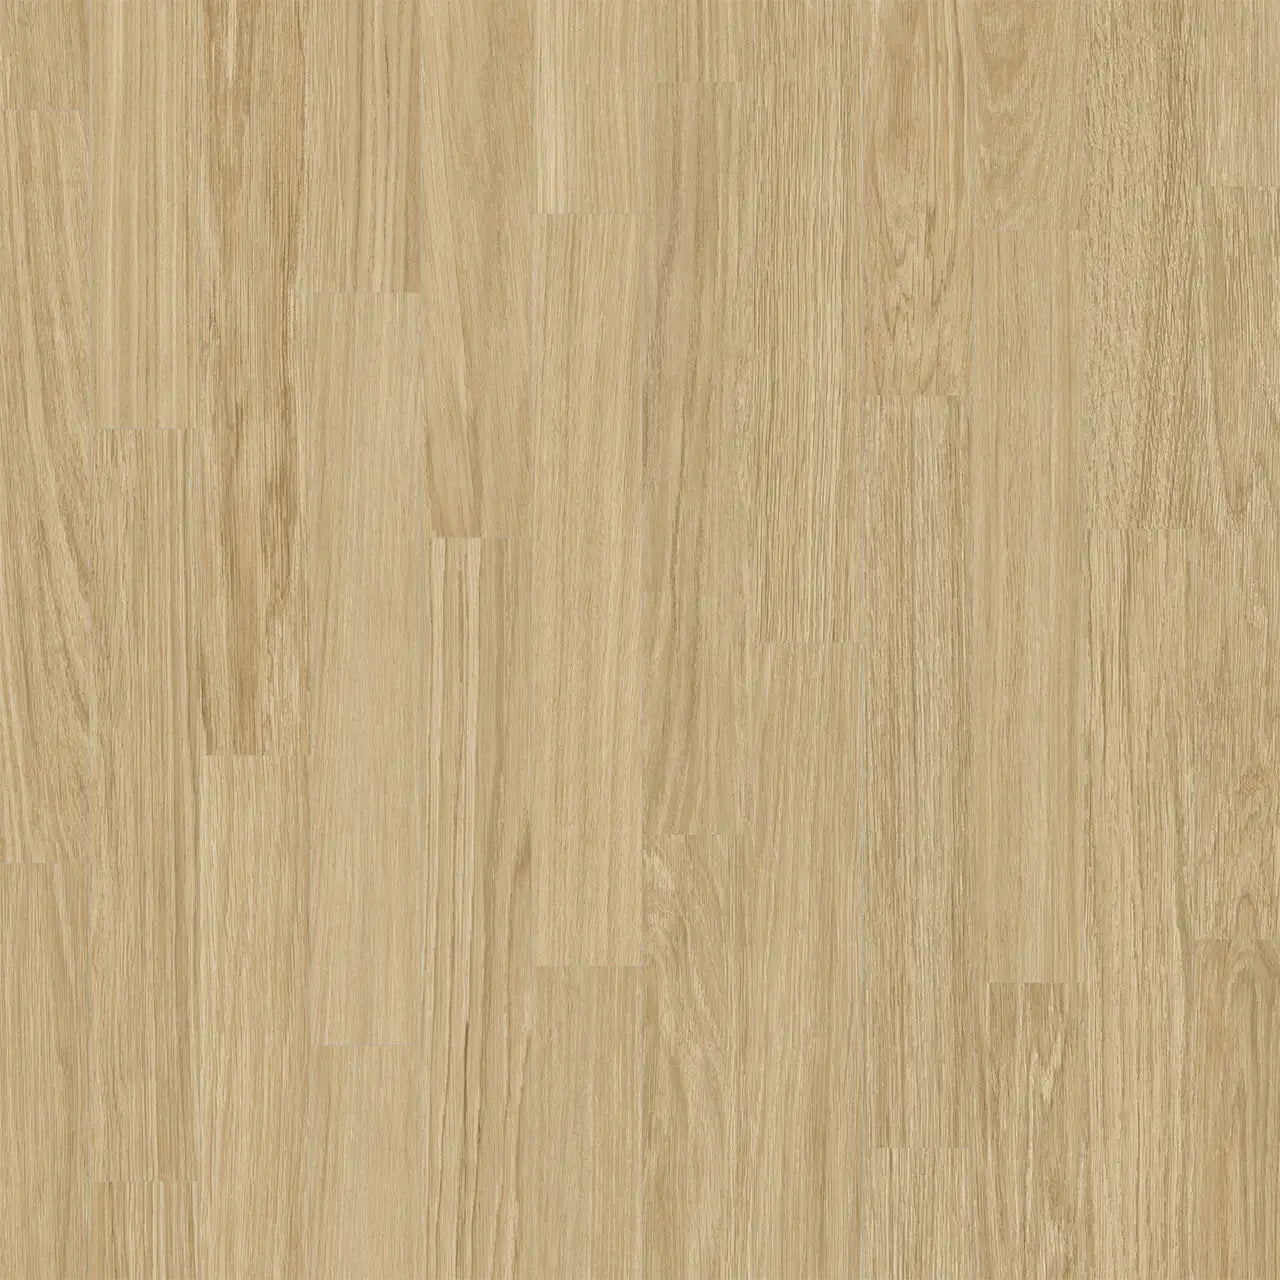 Engineered Floors - Rejuvenate Collection - 7 in. x 48 in. - Artisanal